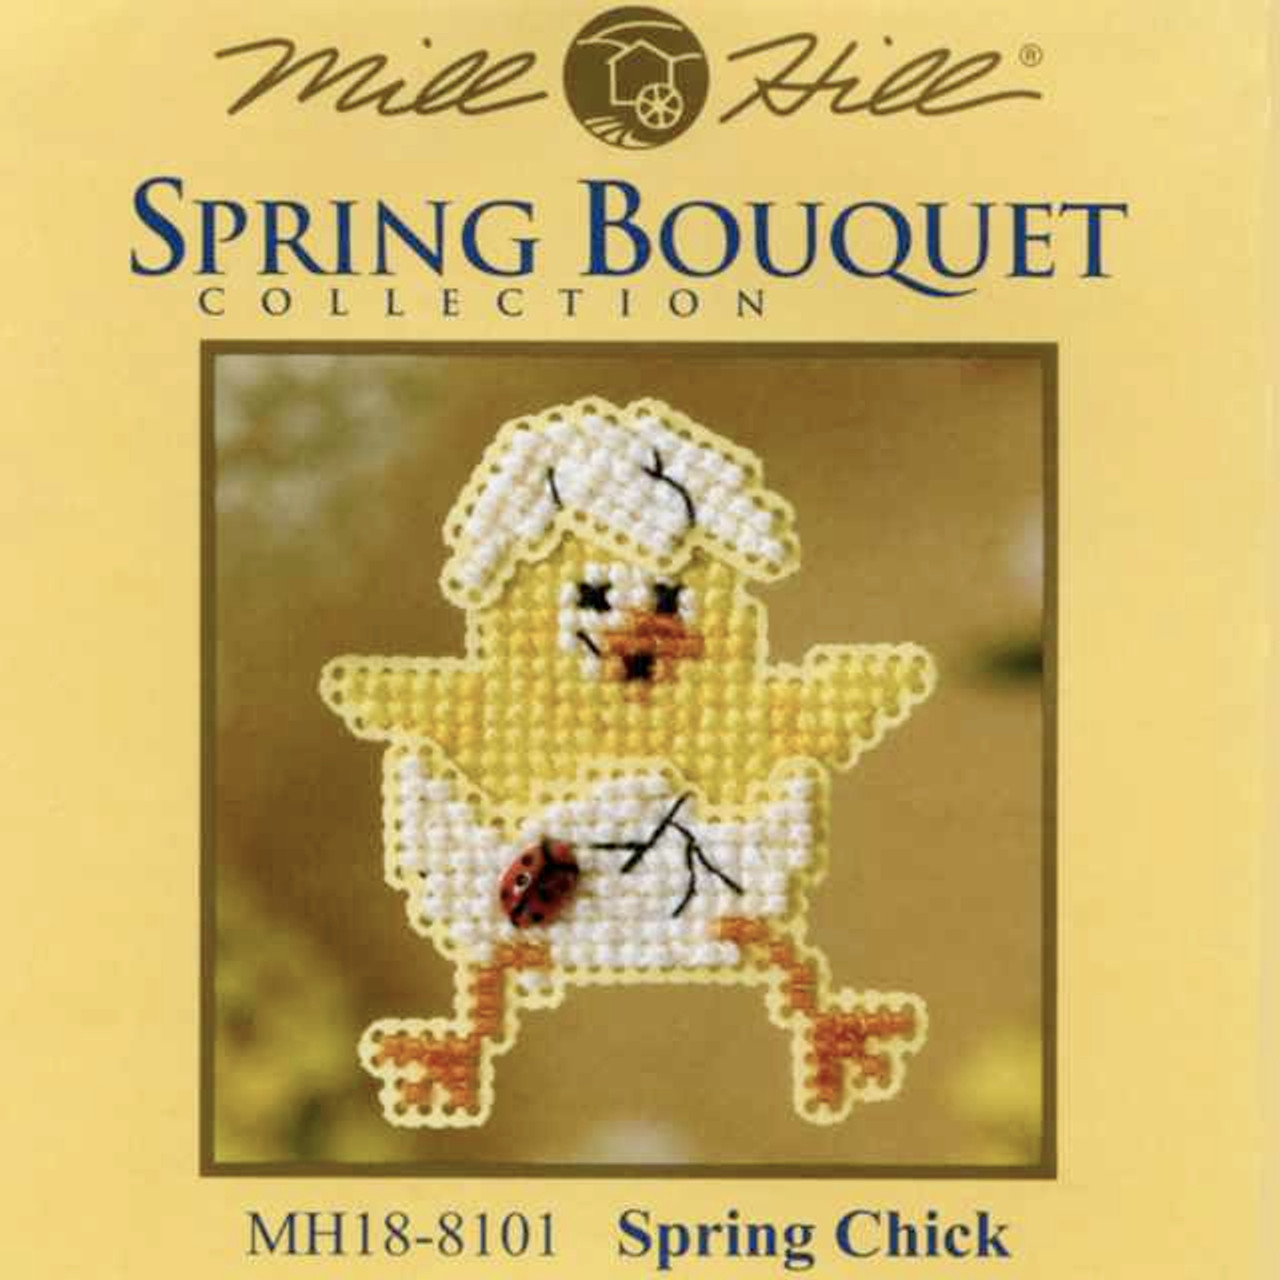 Spring Chick Glass Bead Ornament Kit Mill Hill 2008 Spring Bouquet